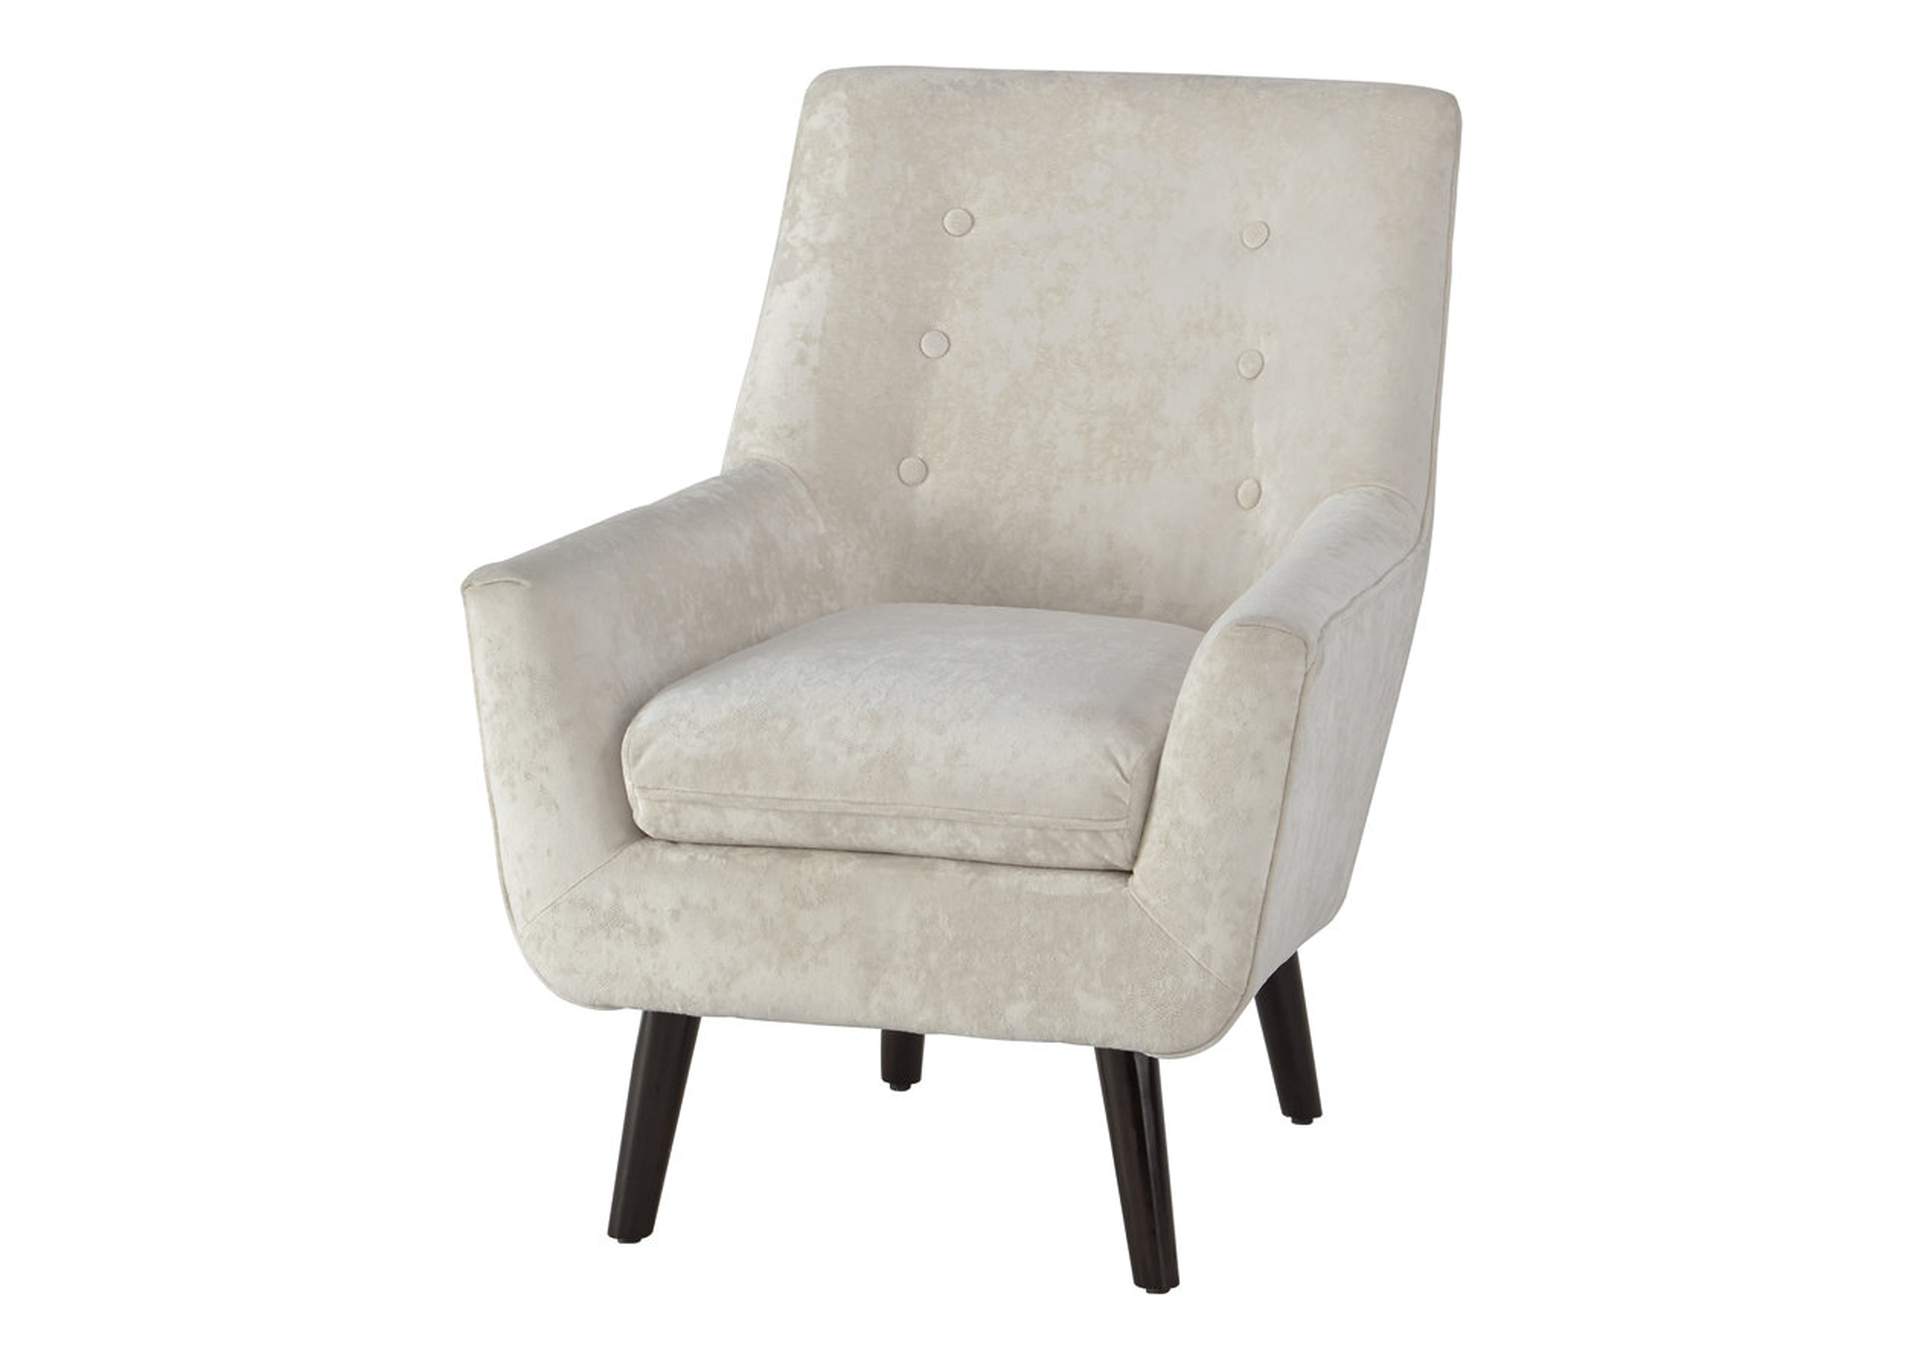 Zossen Accent Chair,Direct To Consumer Express